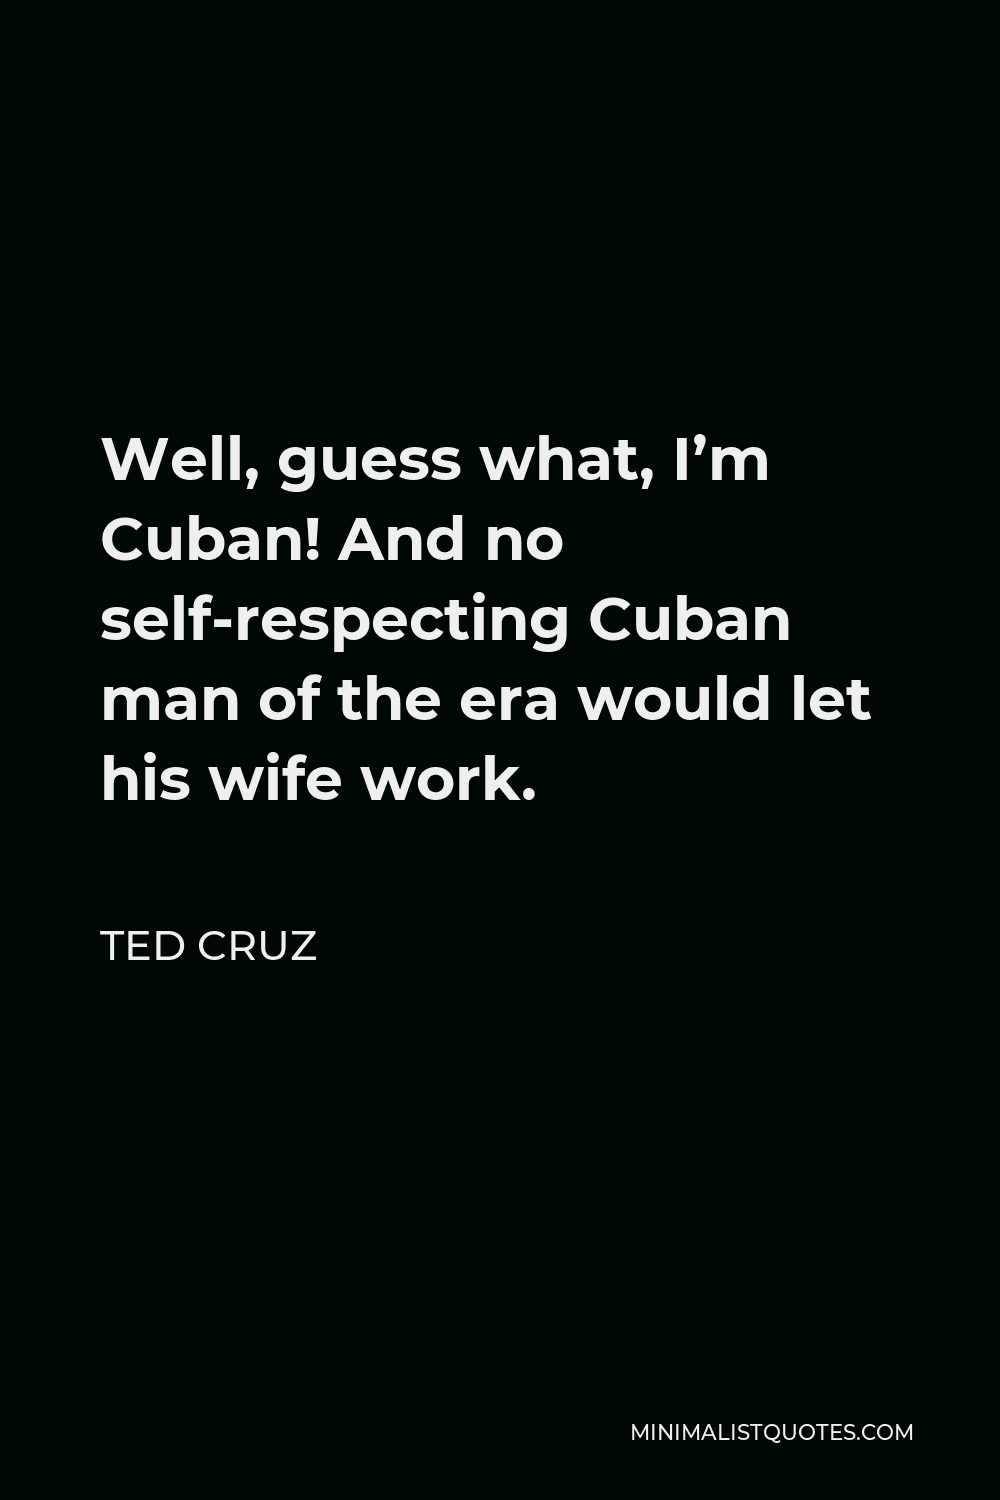 Ted Cruz Quote - Well, guess what, I’m Cuban! And no self-respecting Cuban man of the era would let his wife work.